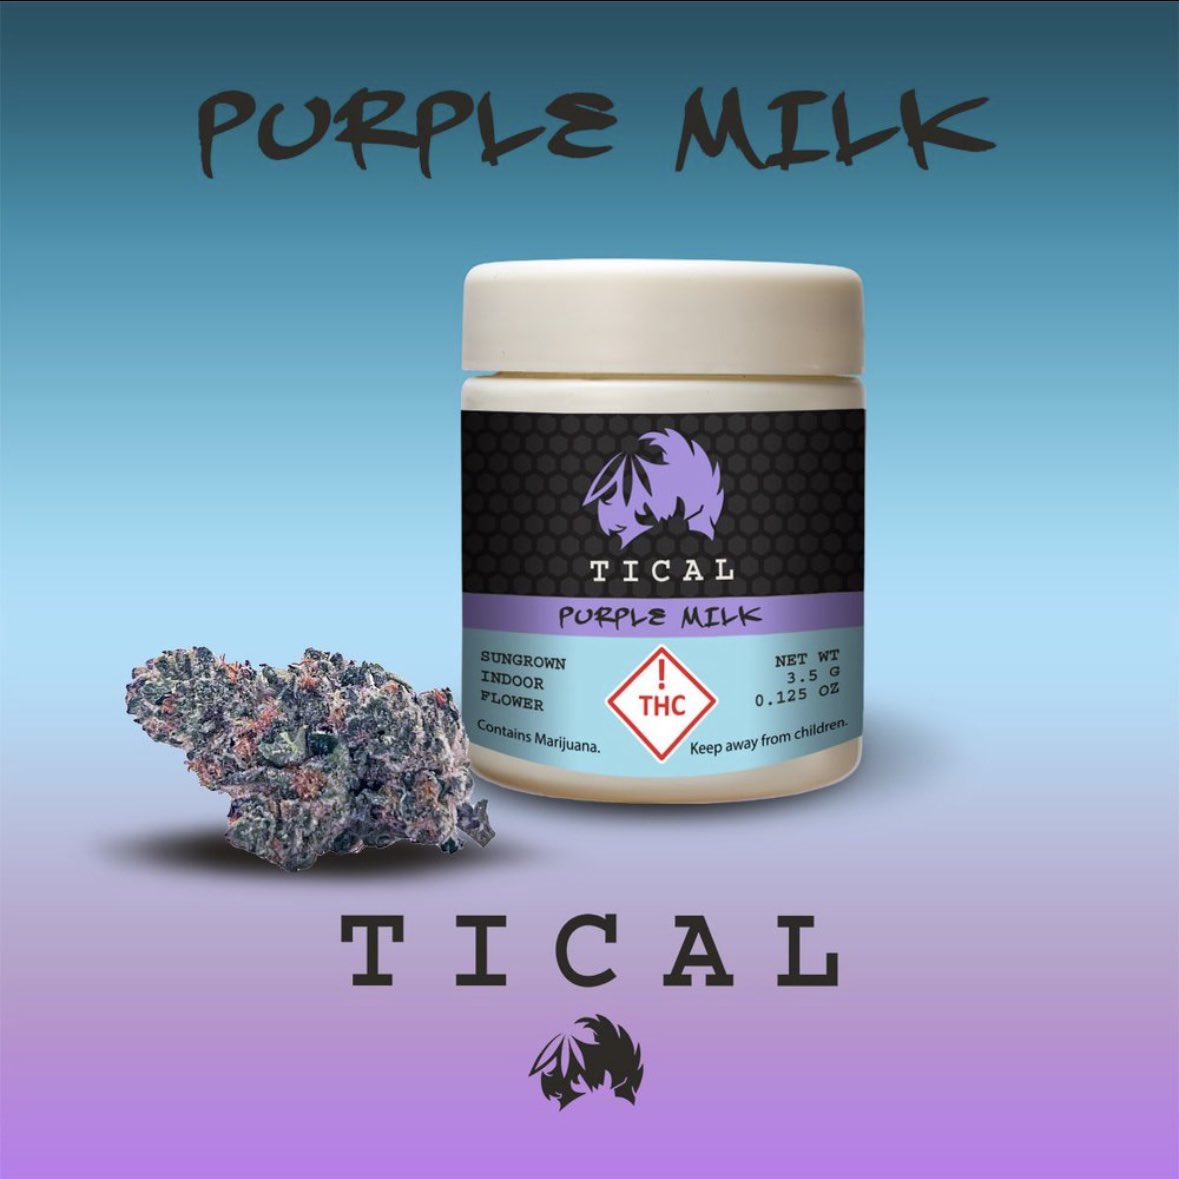 📢🌿🎤 Join us for TICAL Tuesday, Purests! Buy one @ticalofficial cannabis 1/8th, get one for 5⃣0⃣% off! #cannabis #MethodMan #BlackOwned #WomanOwned #VeteranOwned #cannabisindustry #HipHopCulture #IAmAPurest💚